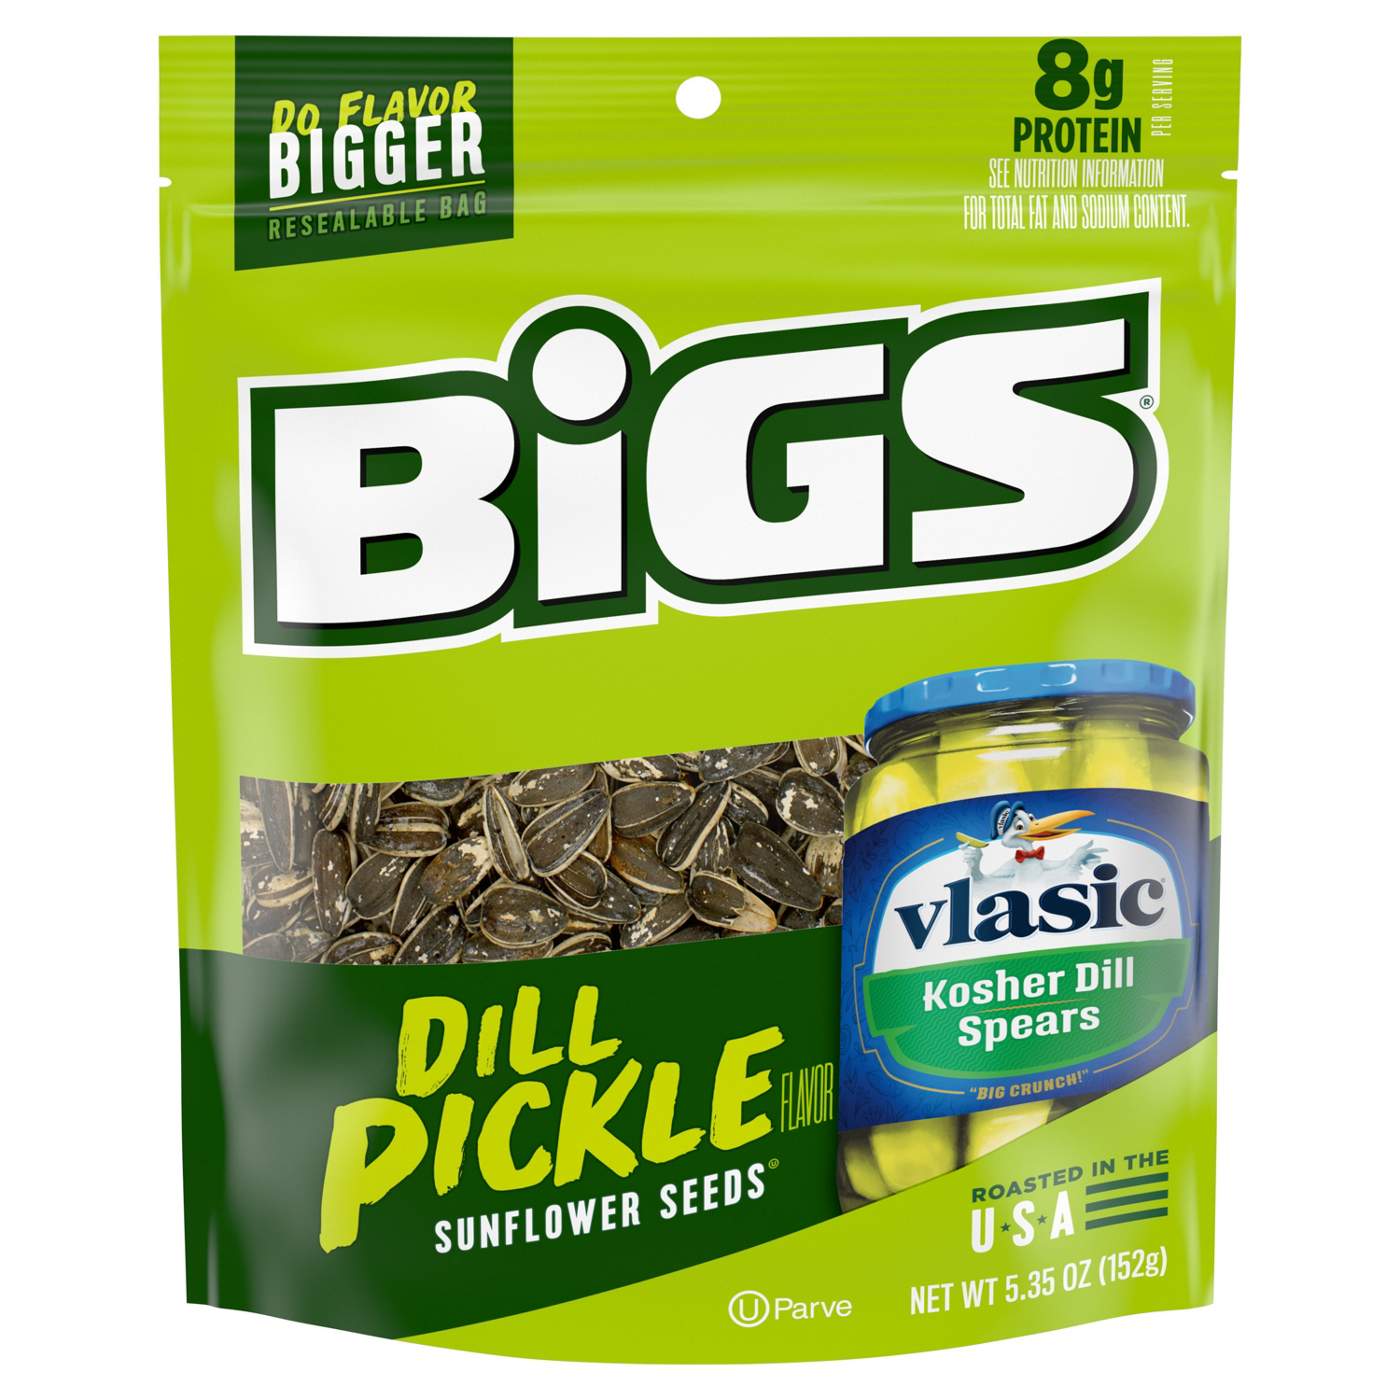 Bigs Vlasic Dill Pickle Flavor Sunflower Seeds; image 1 of 7